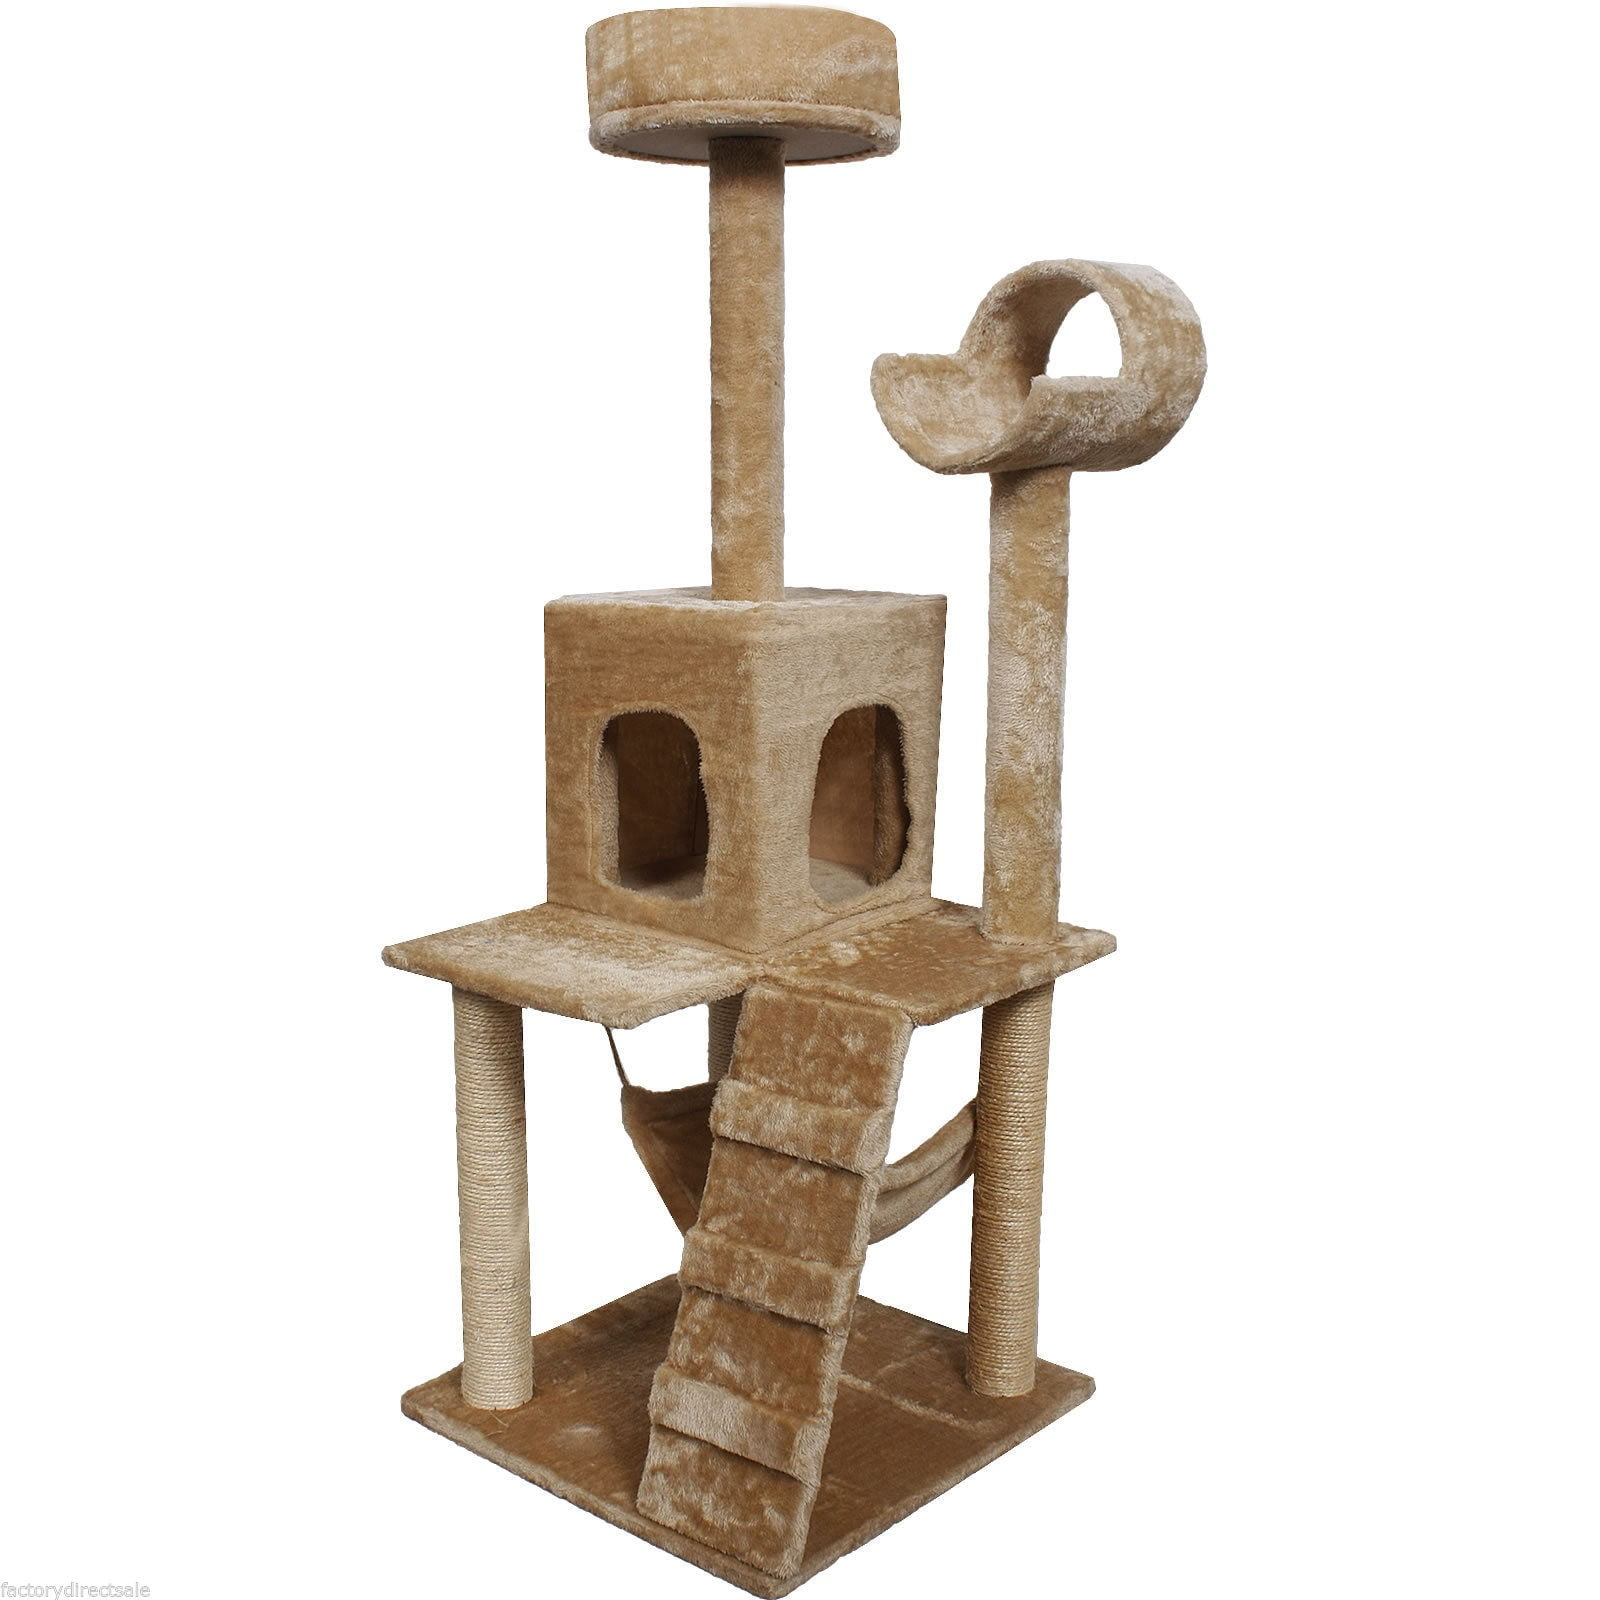 52" Cat Kitty Tree Tower Condo Furniture Scratch Post Pet House Toy Bed